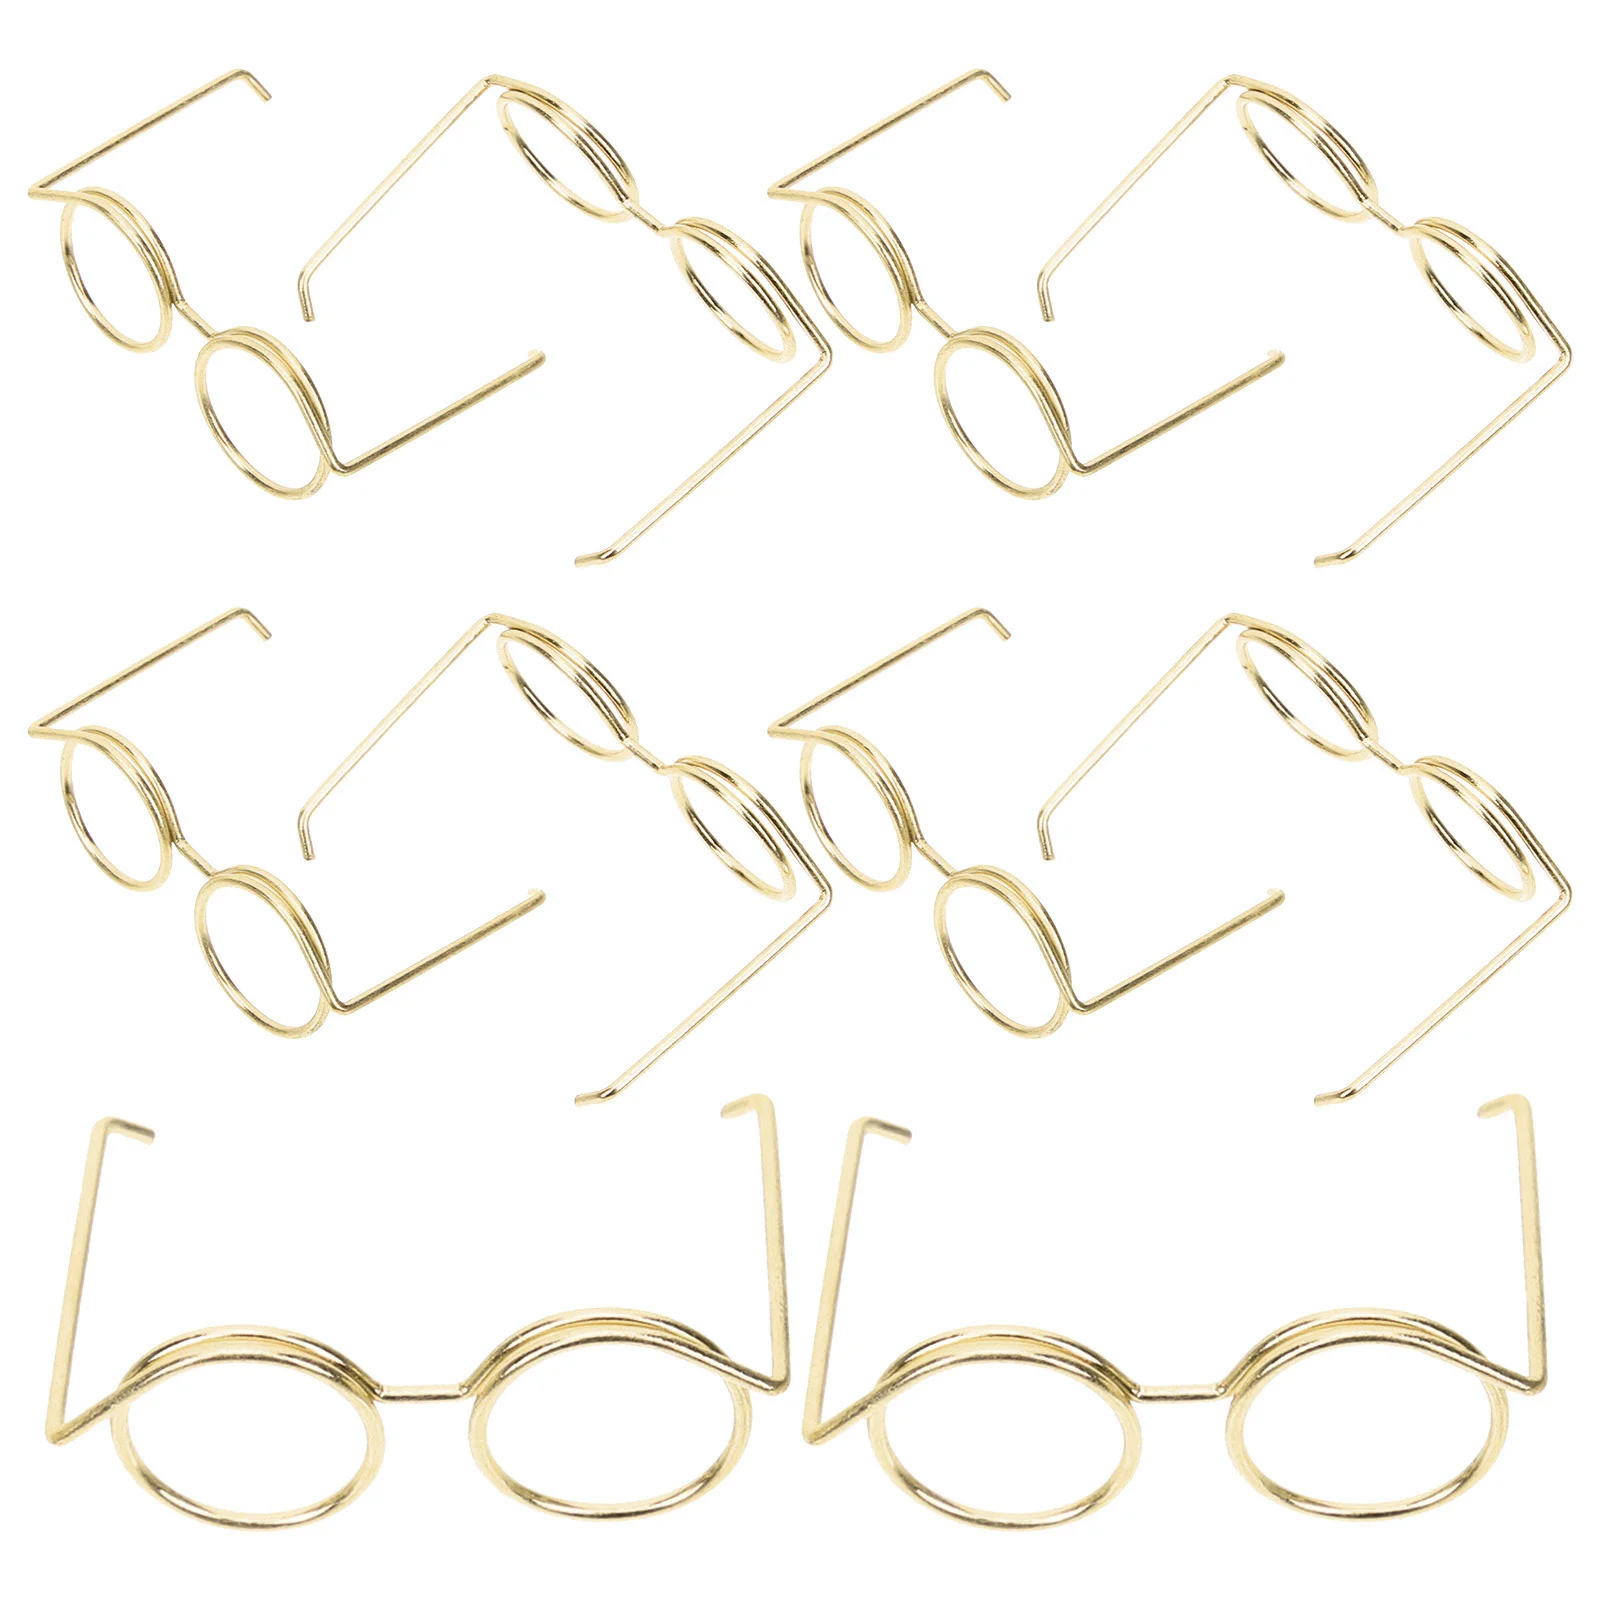 1 2 5pcs round doll glasses dolls fashion retro eyewear for 1 6 1 12 bjd dolls glasses for mini toy eyeglasses doll accessories Retro Doll Glasses Metal Round Frame Lensless Eyewear Doll Sunglasses Doll Dress Up Accessories Children Gifts